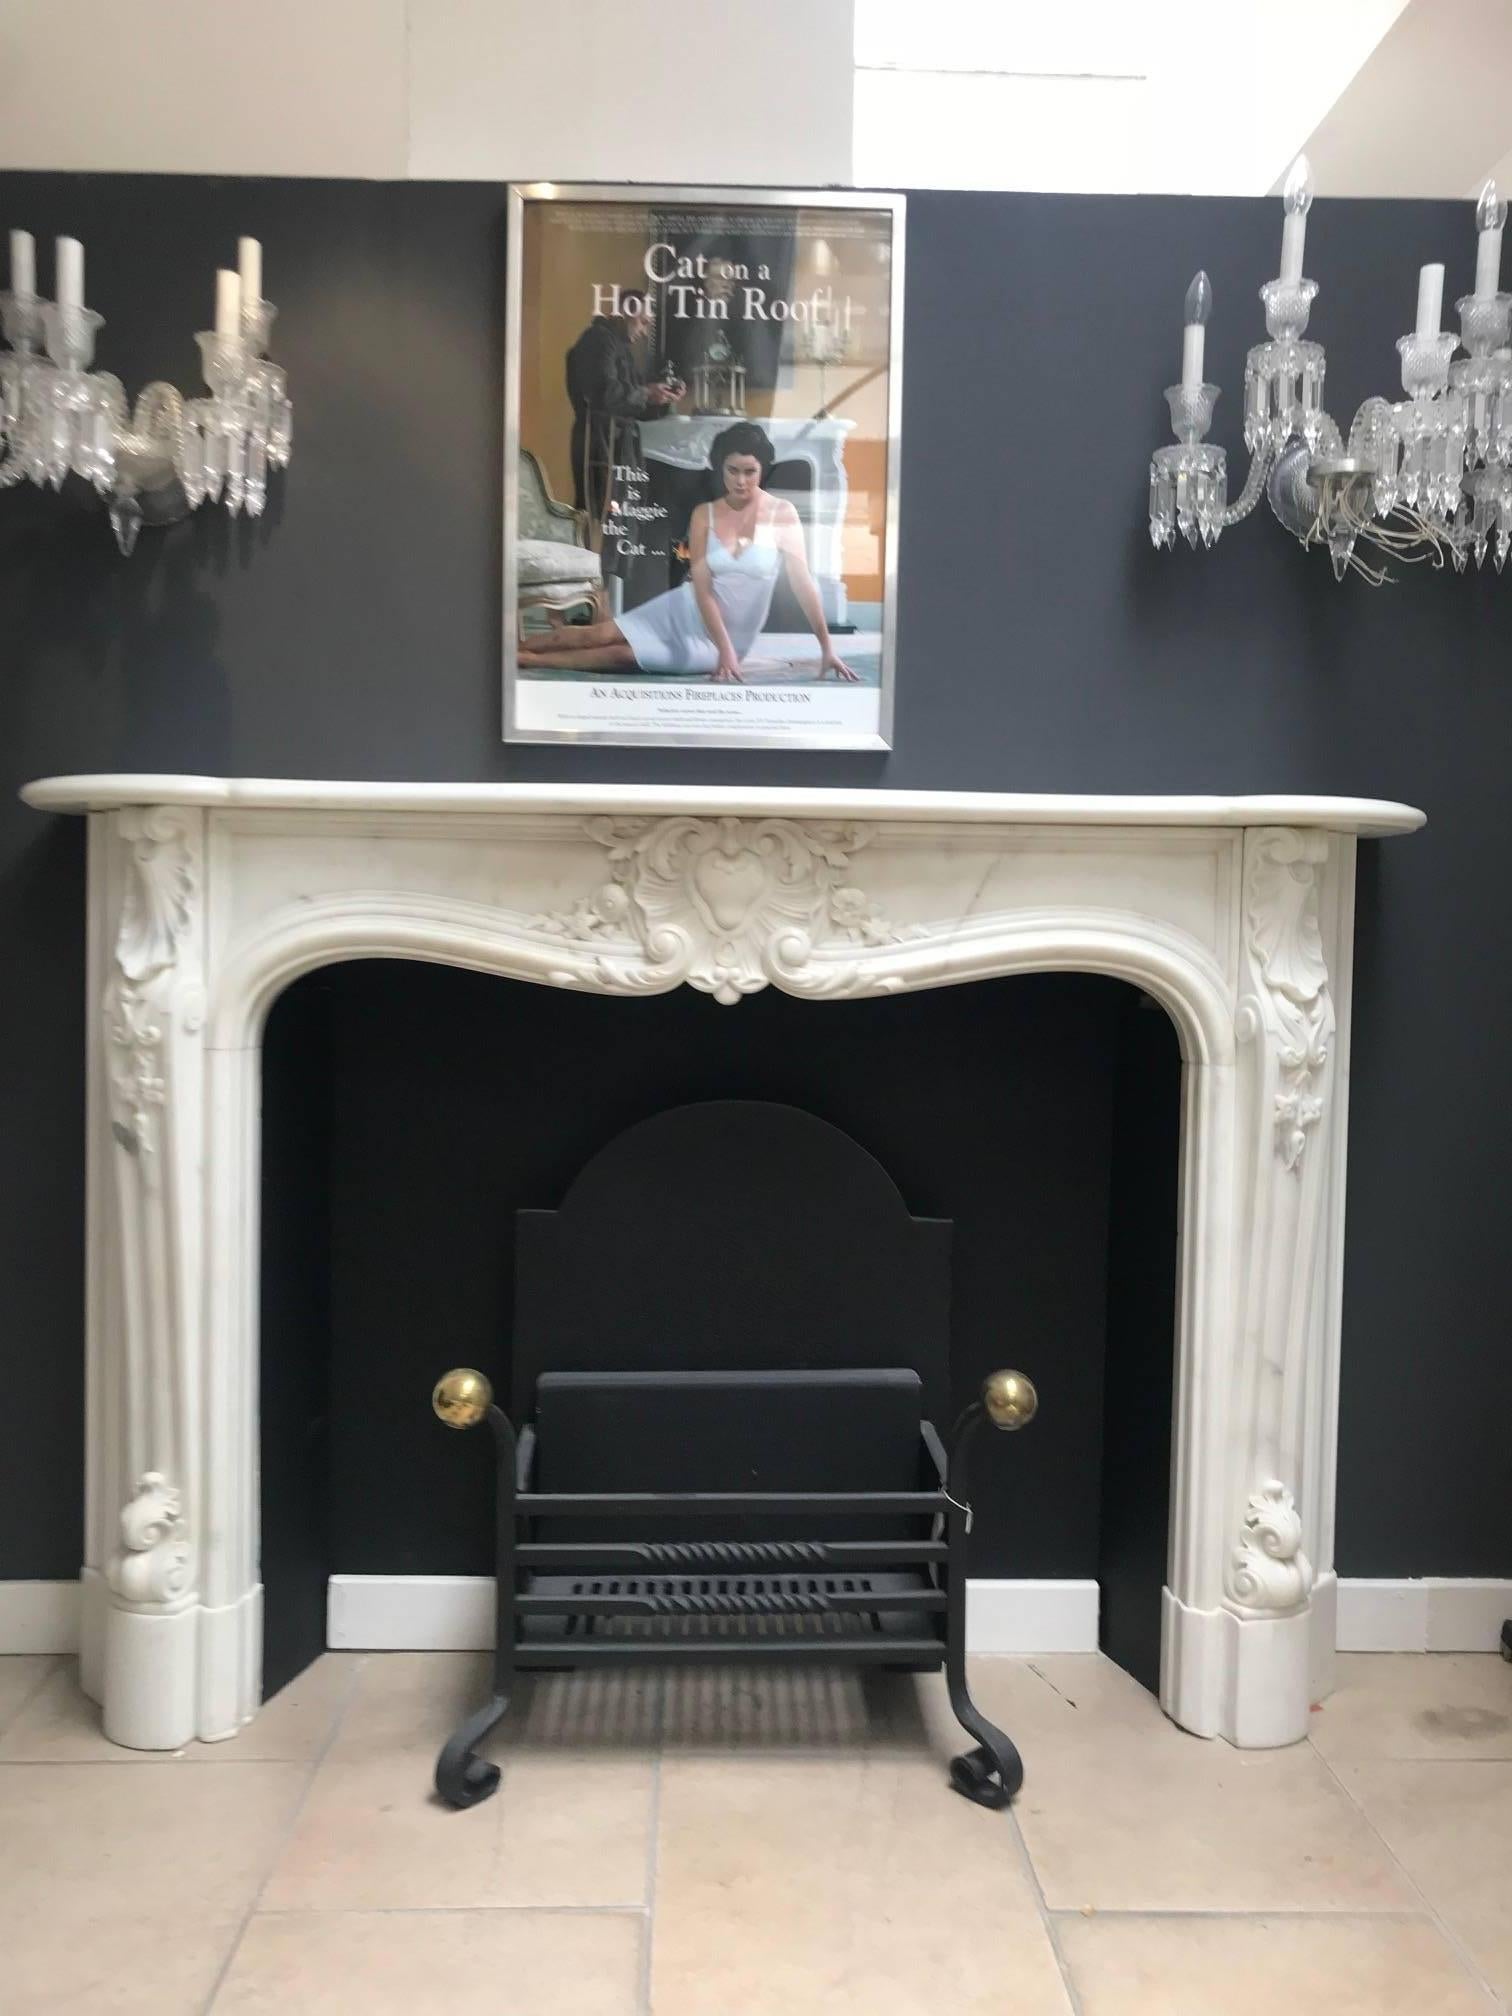 A beautiful early 19th century, circa 1811-1820 statuary white marble chimneypiece surround. This fireplace is English made and hand-carved in Italian marble with French influence of the Louis period. Recently restored after many years in storage.